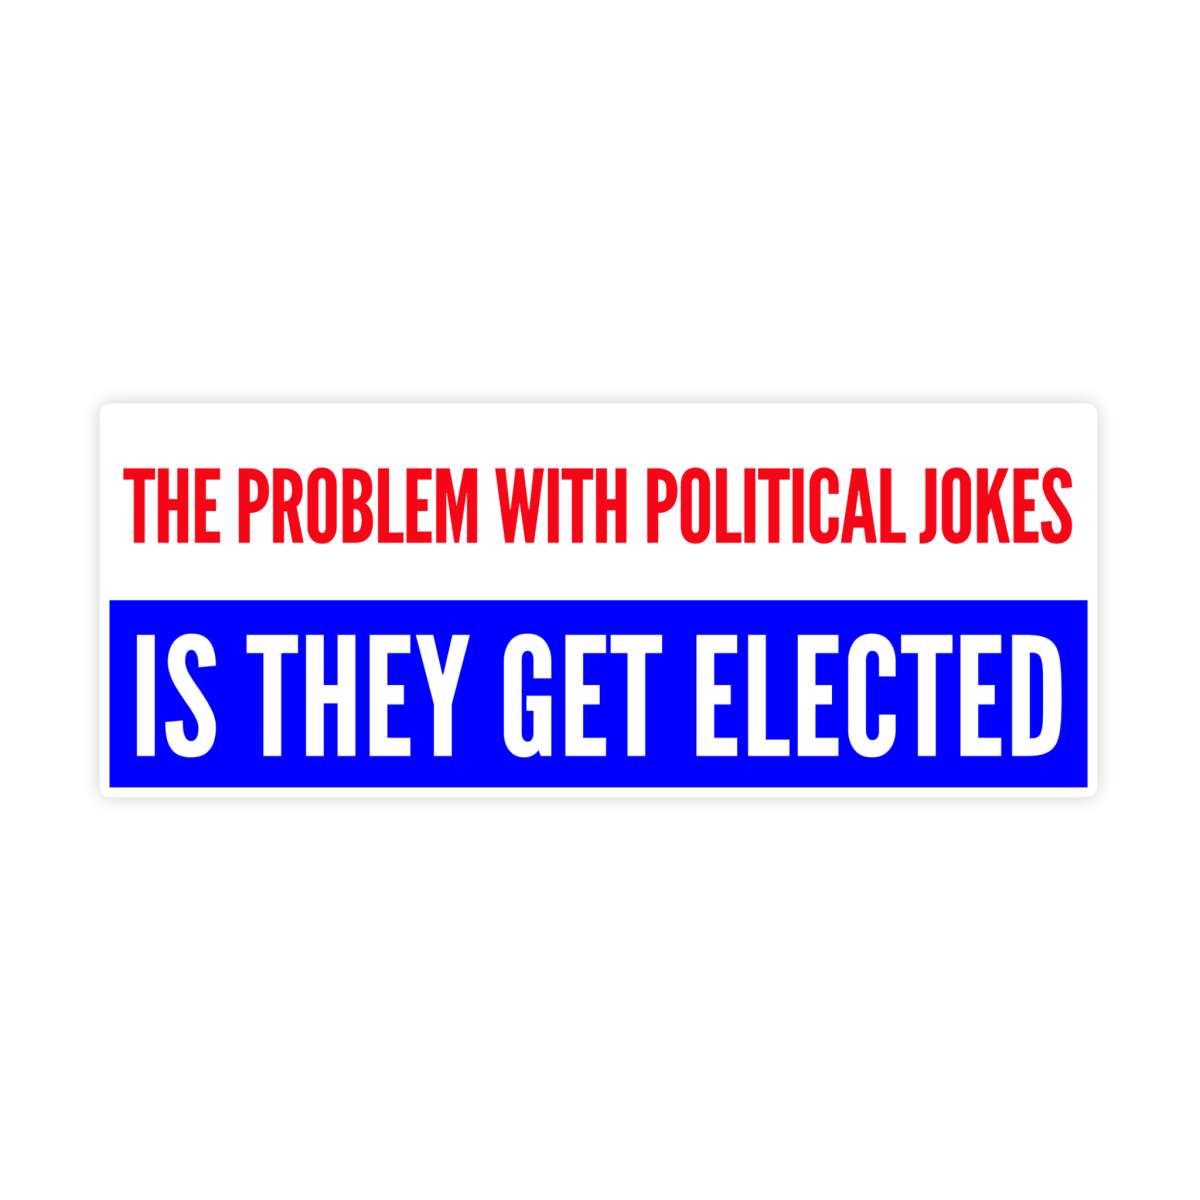 The Problem With Political Jokes Is They Get Elected Sticker - stickerbullThe Problem With Political Jokes Is They Get Elected StickerRetail StickerstickerbullstickerbullTaylor_PoliticalJokesThe Problem With Political Jokes Is They Get Elected Sticker